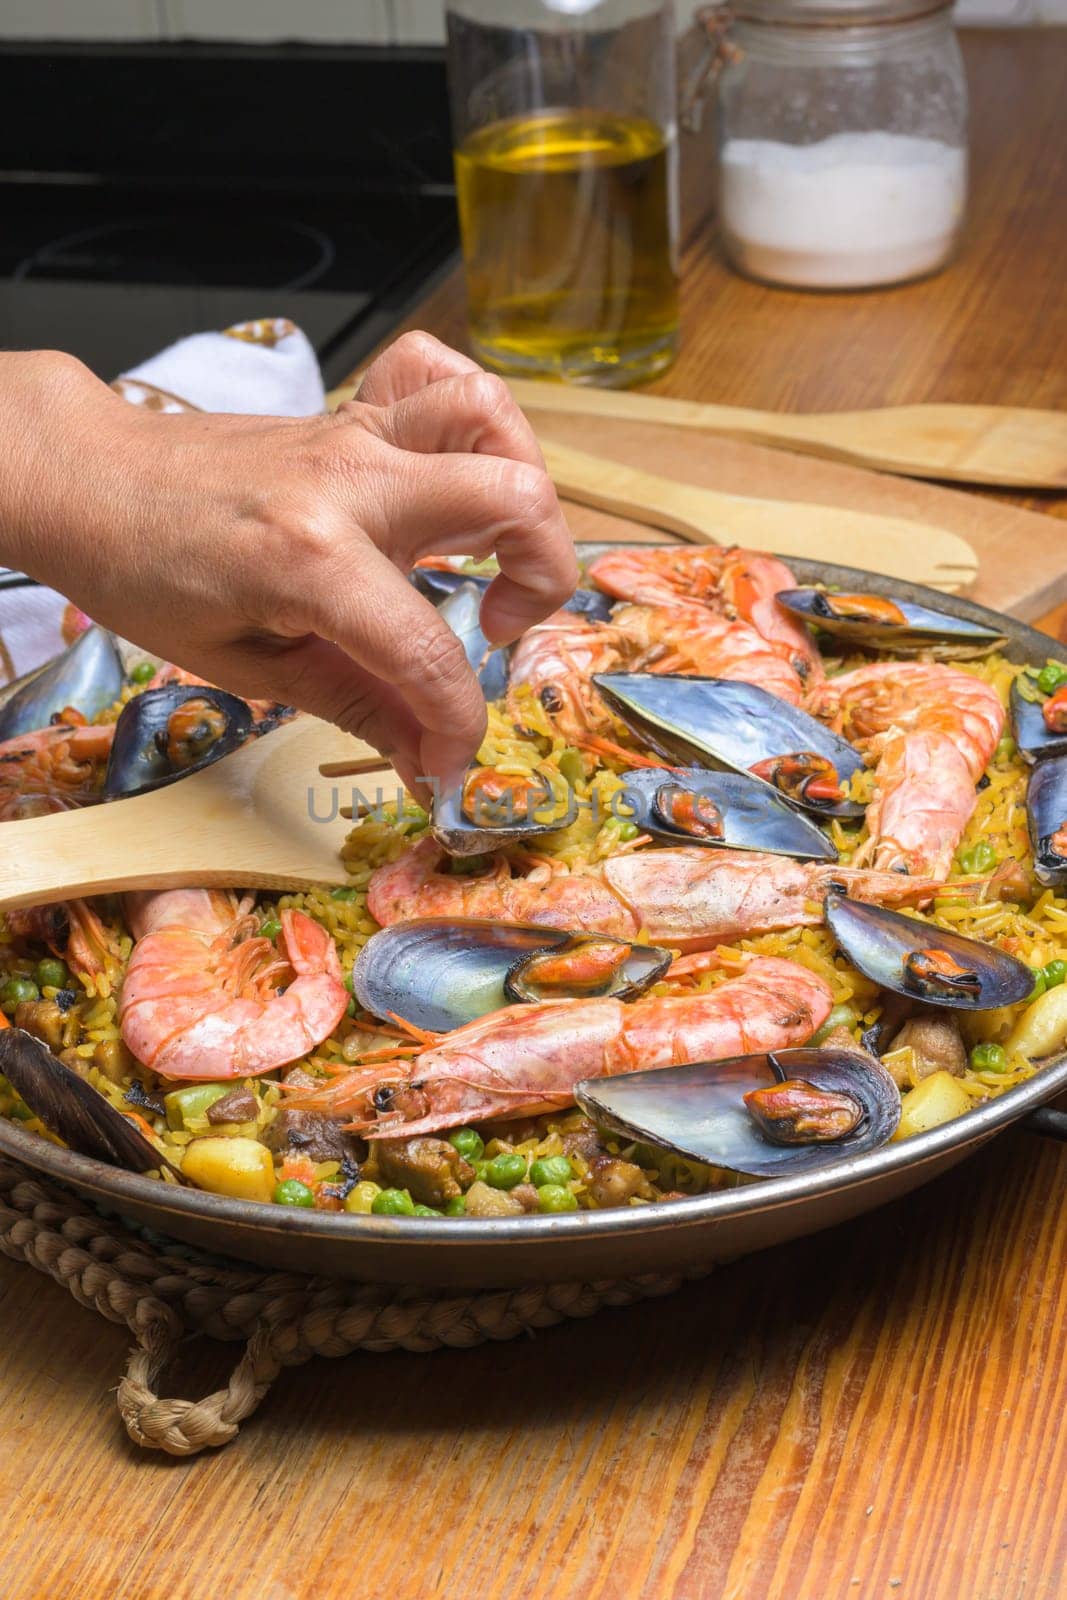 Hand serving shrimp and mussel paella with a wooden spoon from a pan, typical Spanish cuisine, Majorca, Balearic Islands, Spain by carlosviv